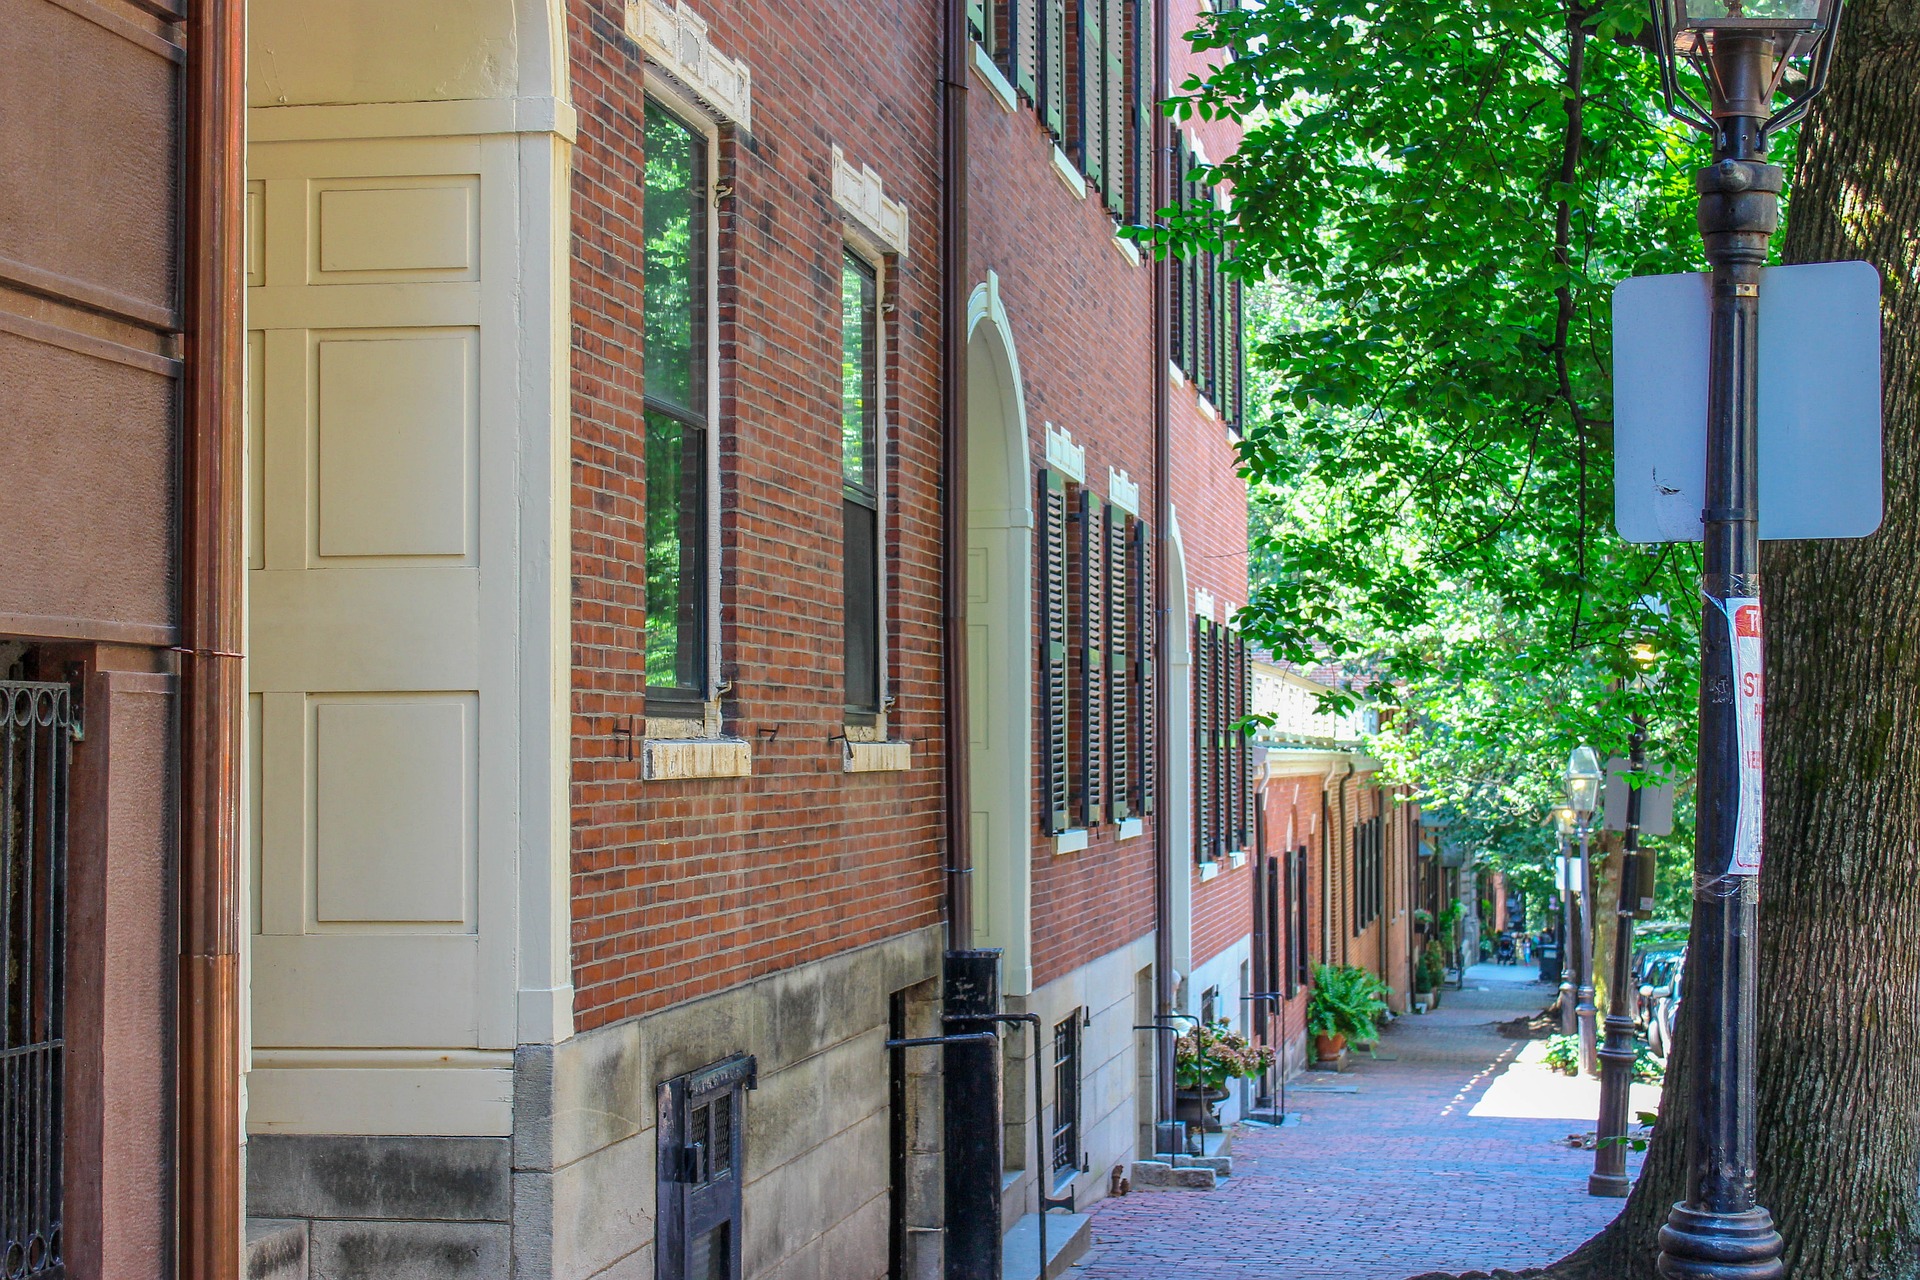 What It's Like to Live In BEACON HILL (Boston Neighborhoods